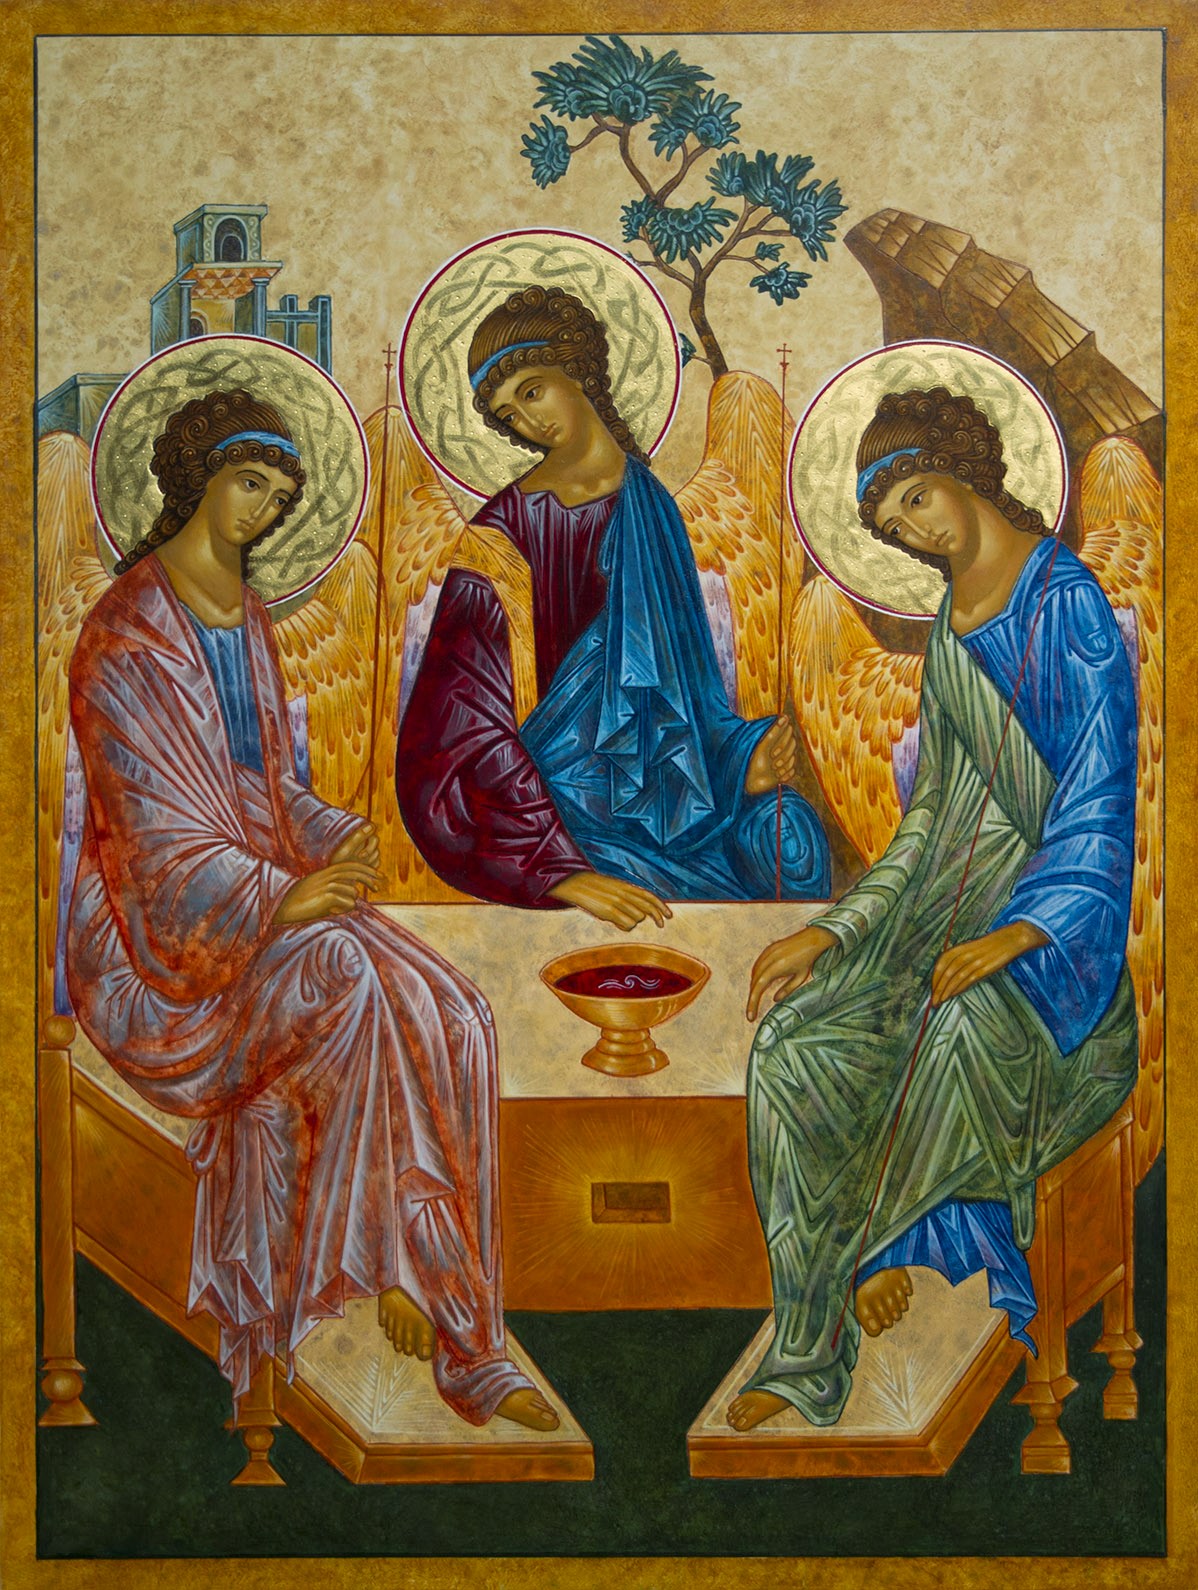 Rublev's classic icon of the trinity as three people sitting at a table.